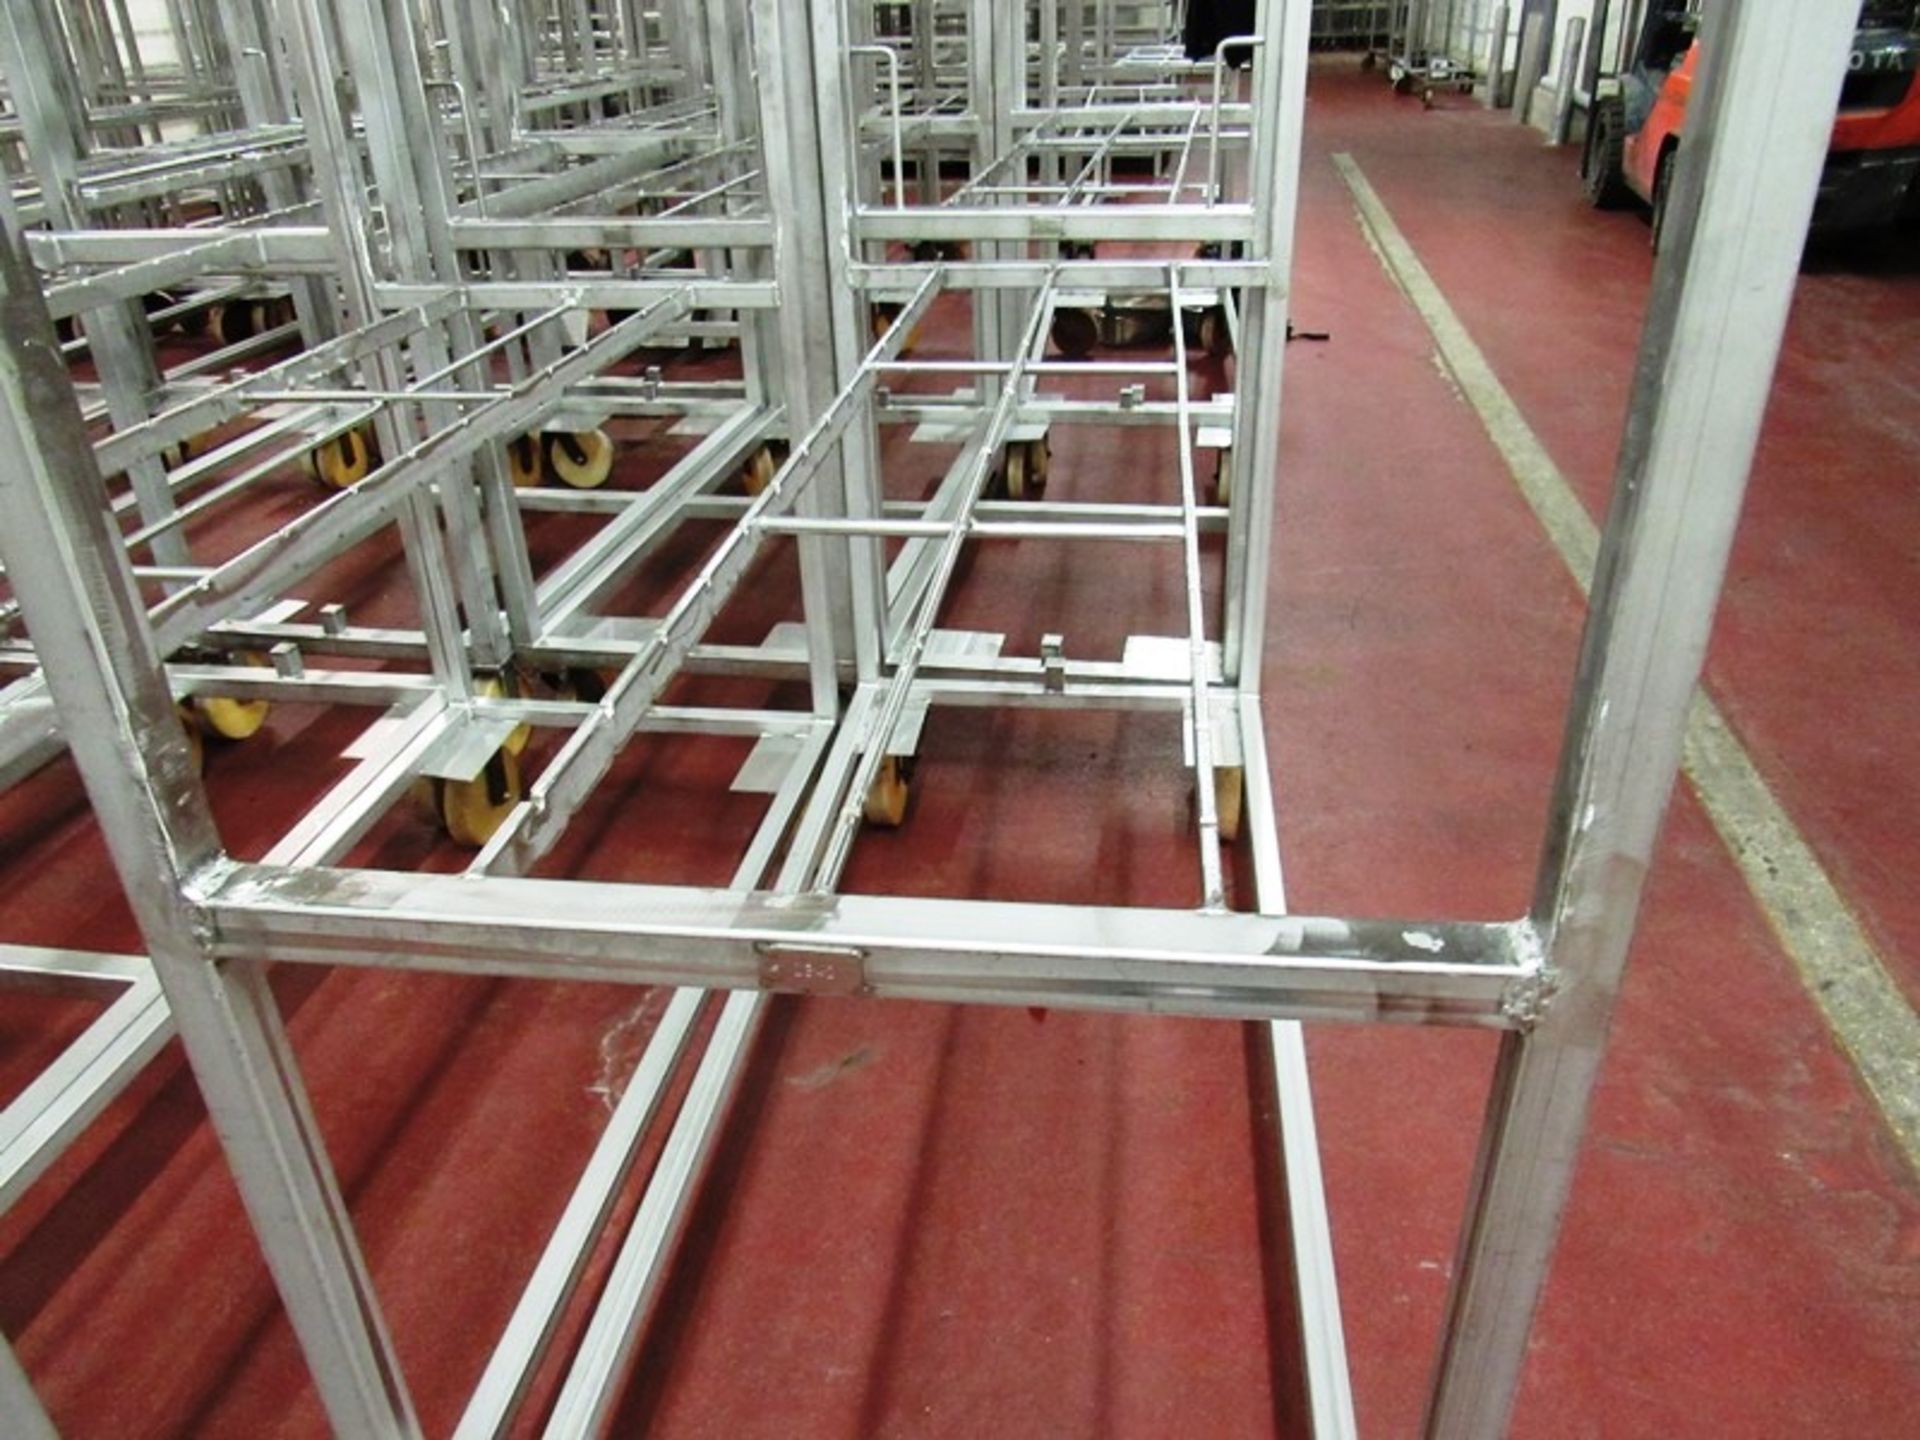 Stainless Steel Belly Racks, 30" W X 72" L X 80" T on 8" casters, holds 60 bellies ($100.00 Required - Image 2 of 4